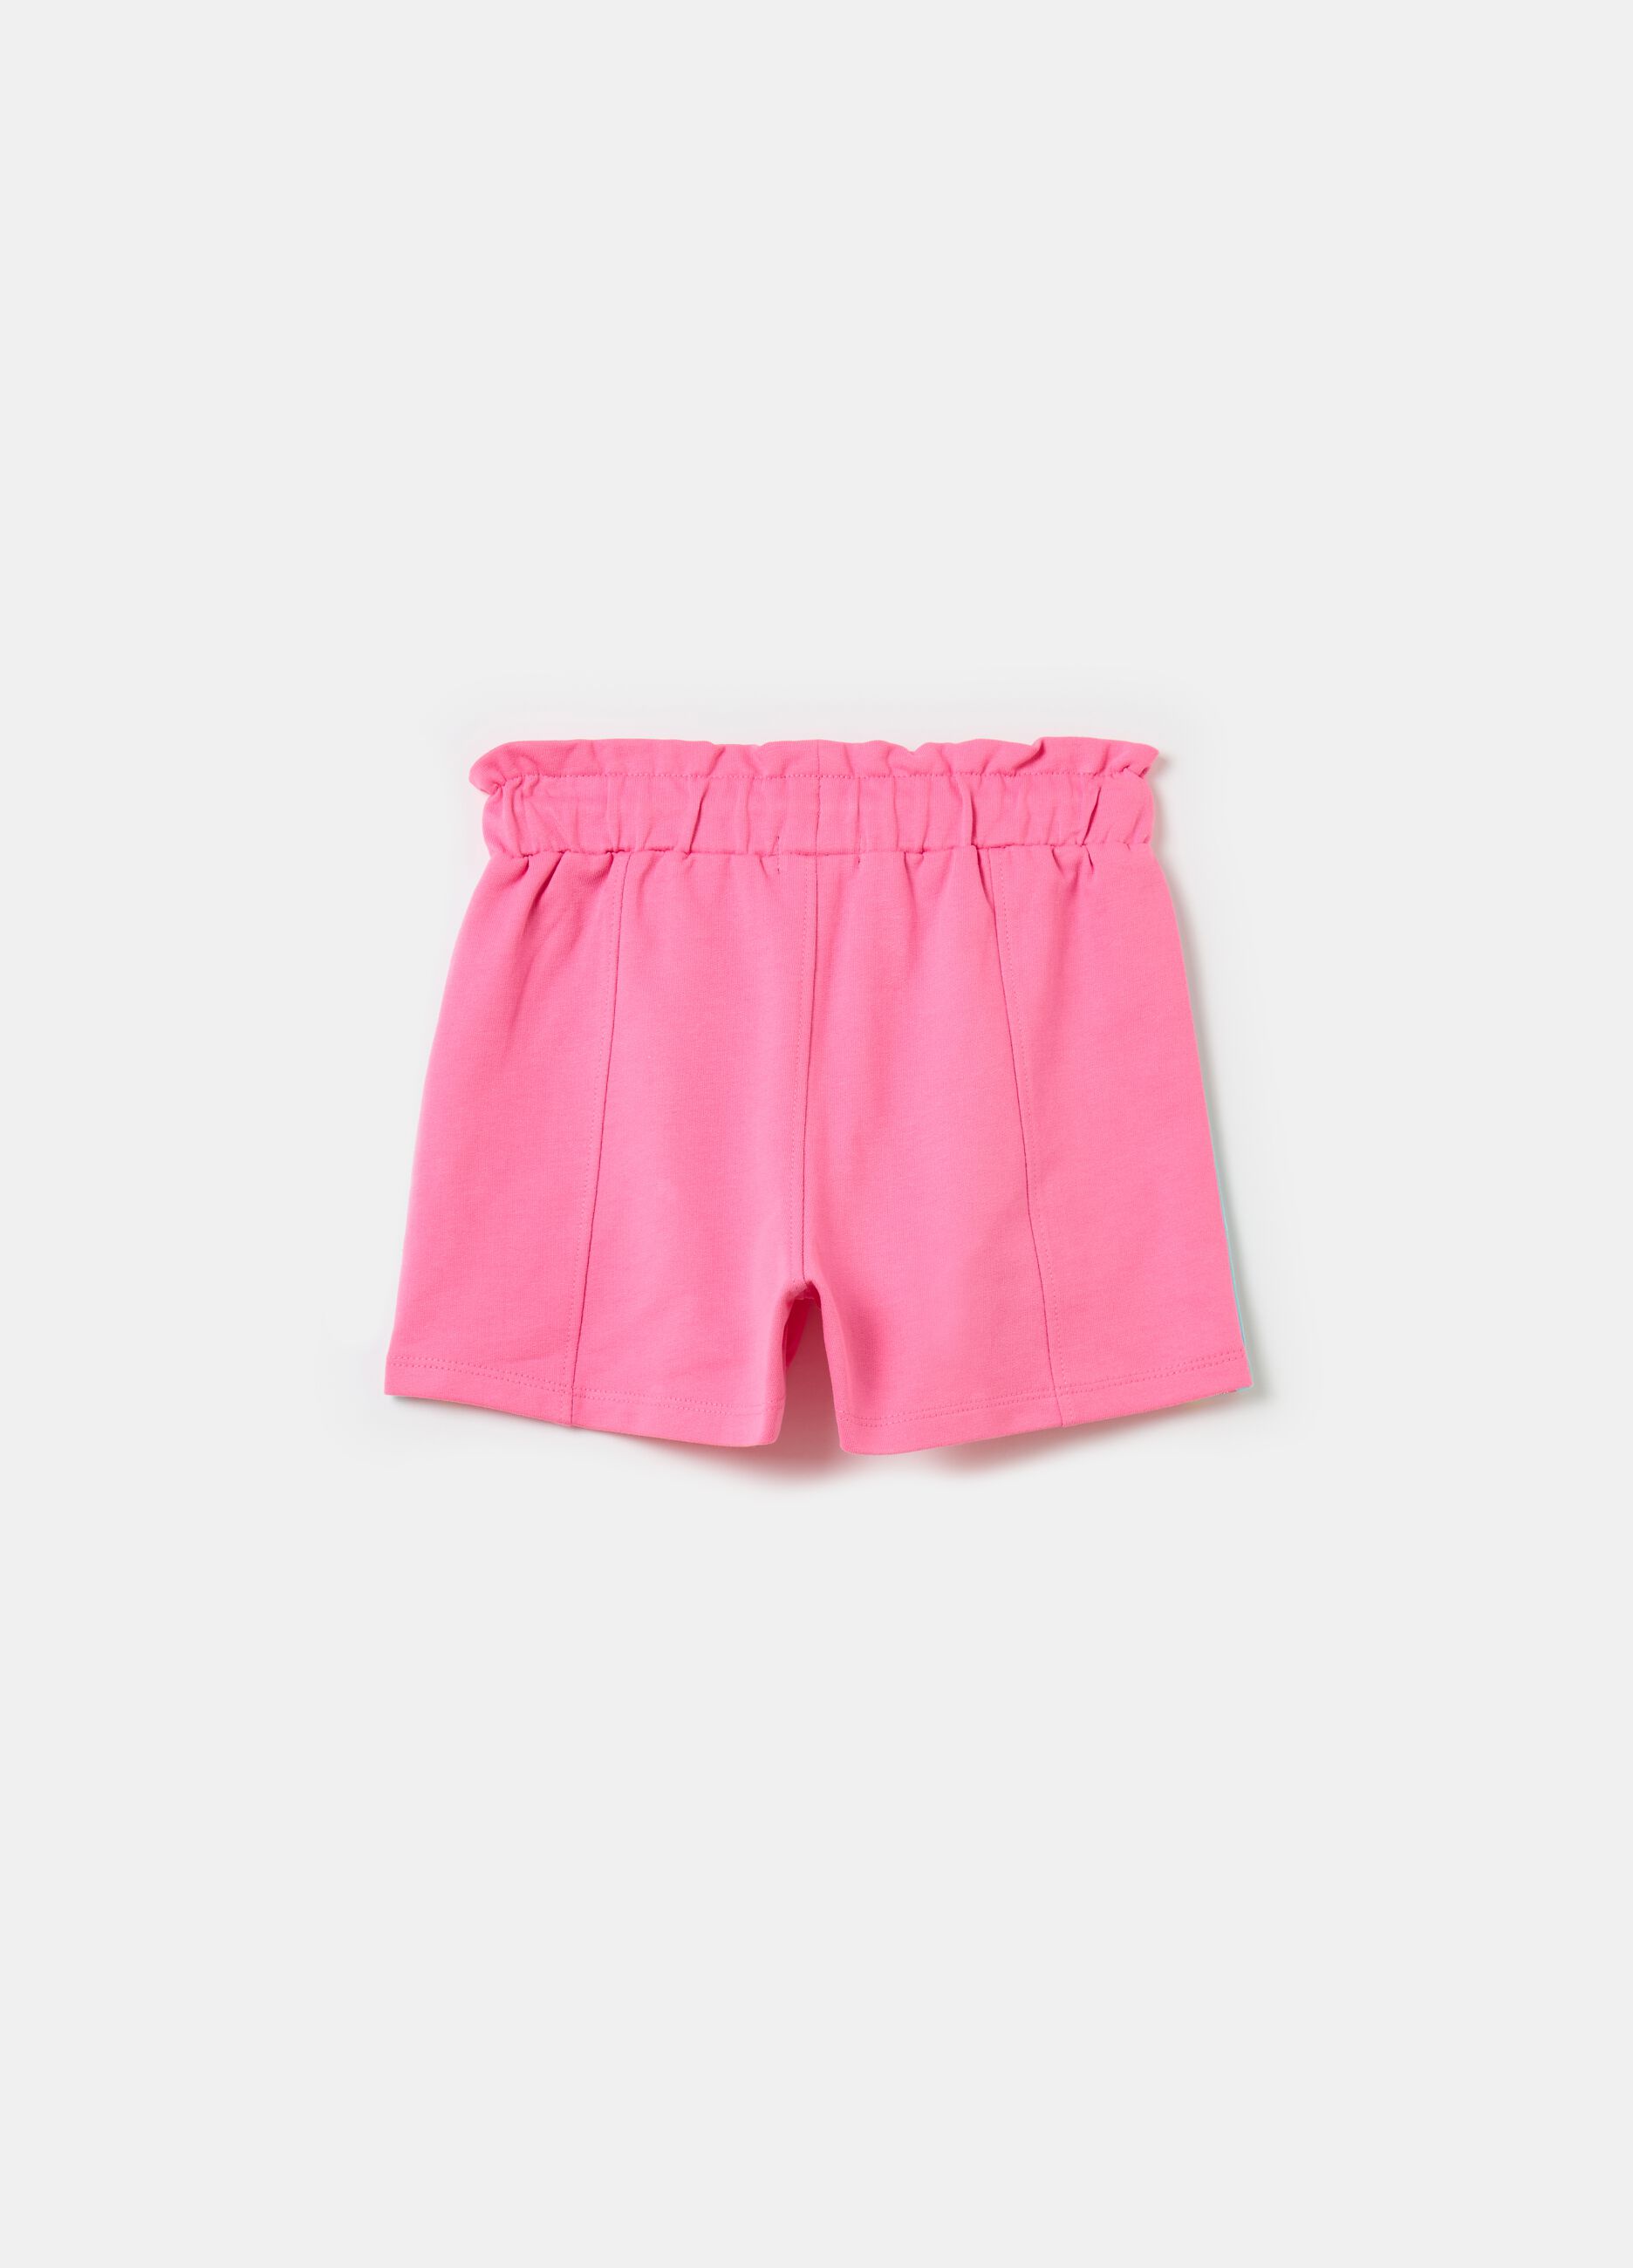 Shorts with striped bands and drawstring